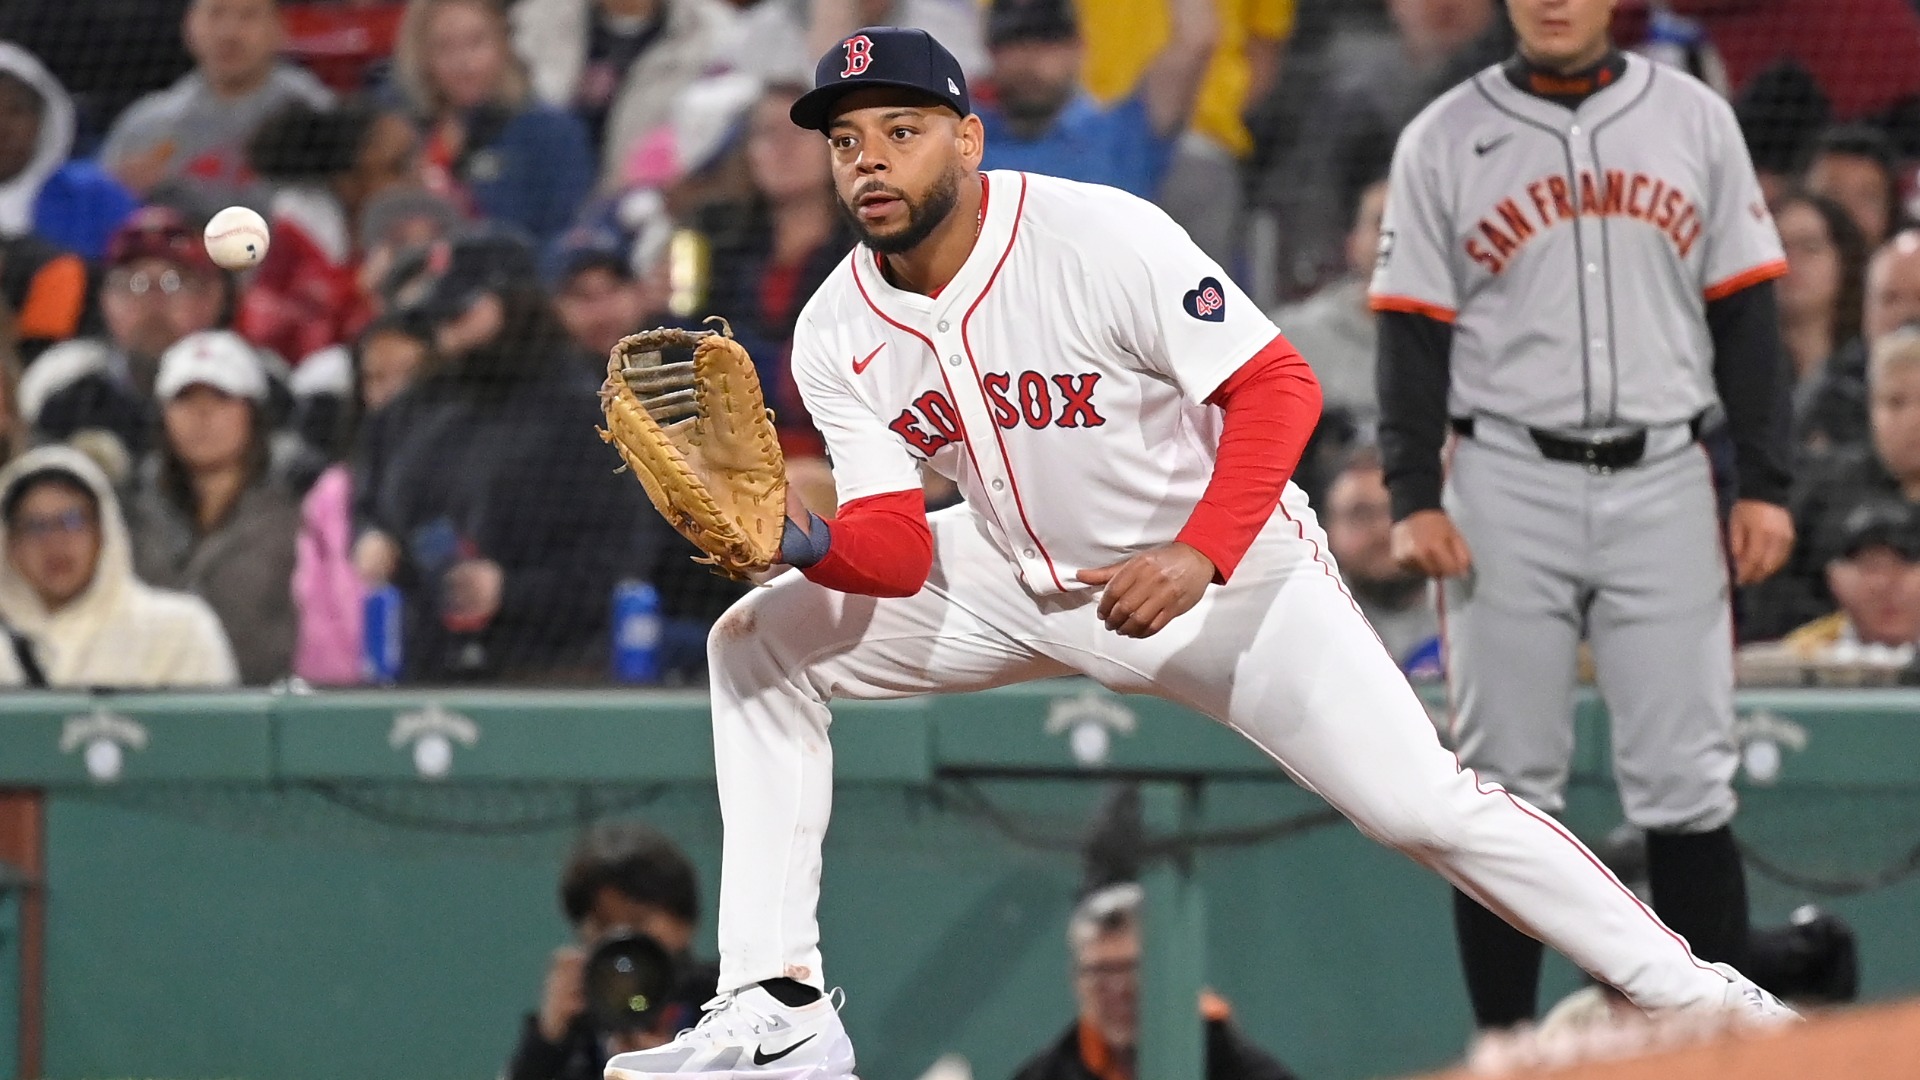 Red Sox Newcomer Thrilled To Be Part Of Boston Franchise